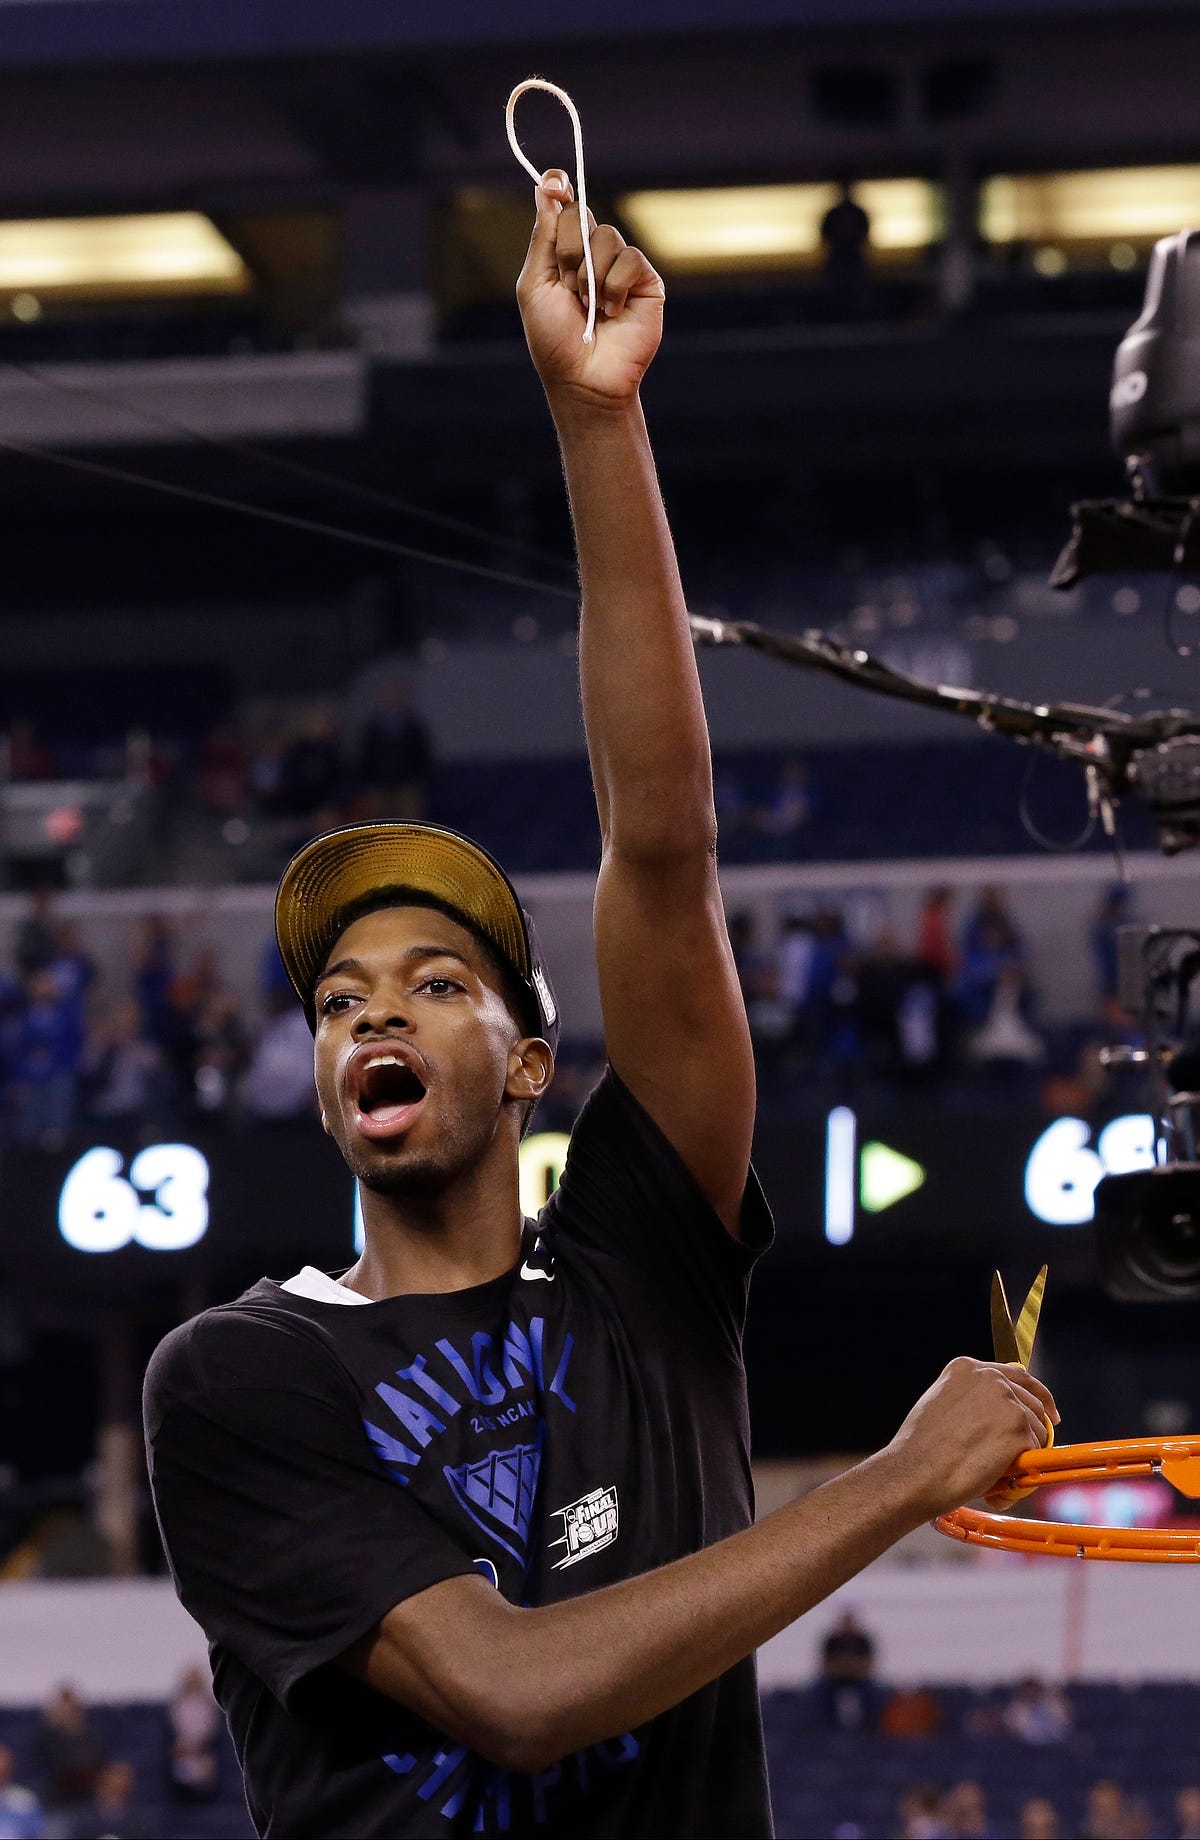 Report: NCAA Investigating Duke Basketball Players Over Receiving Free Strands of Net